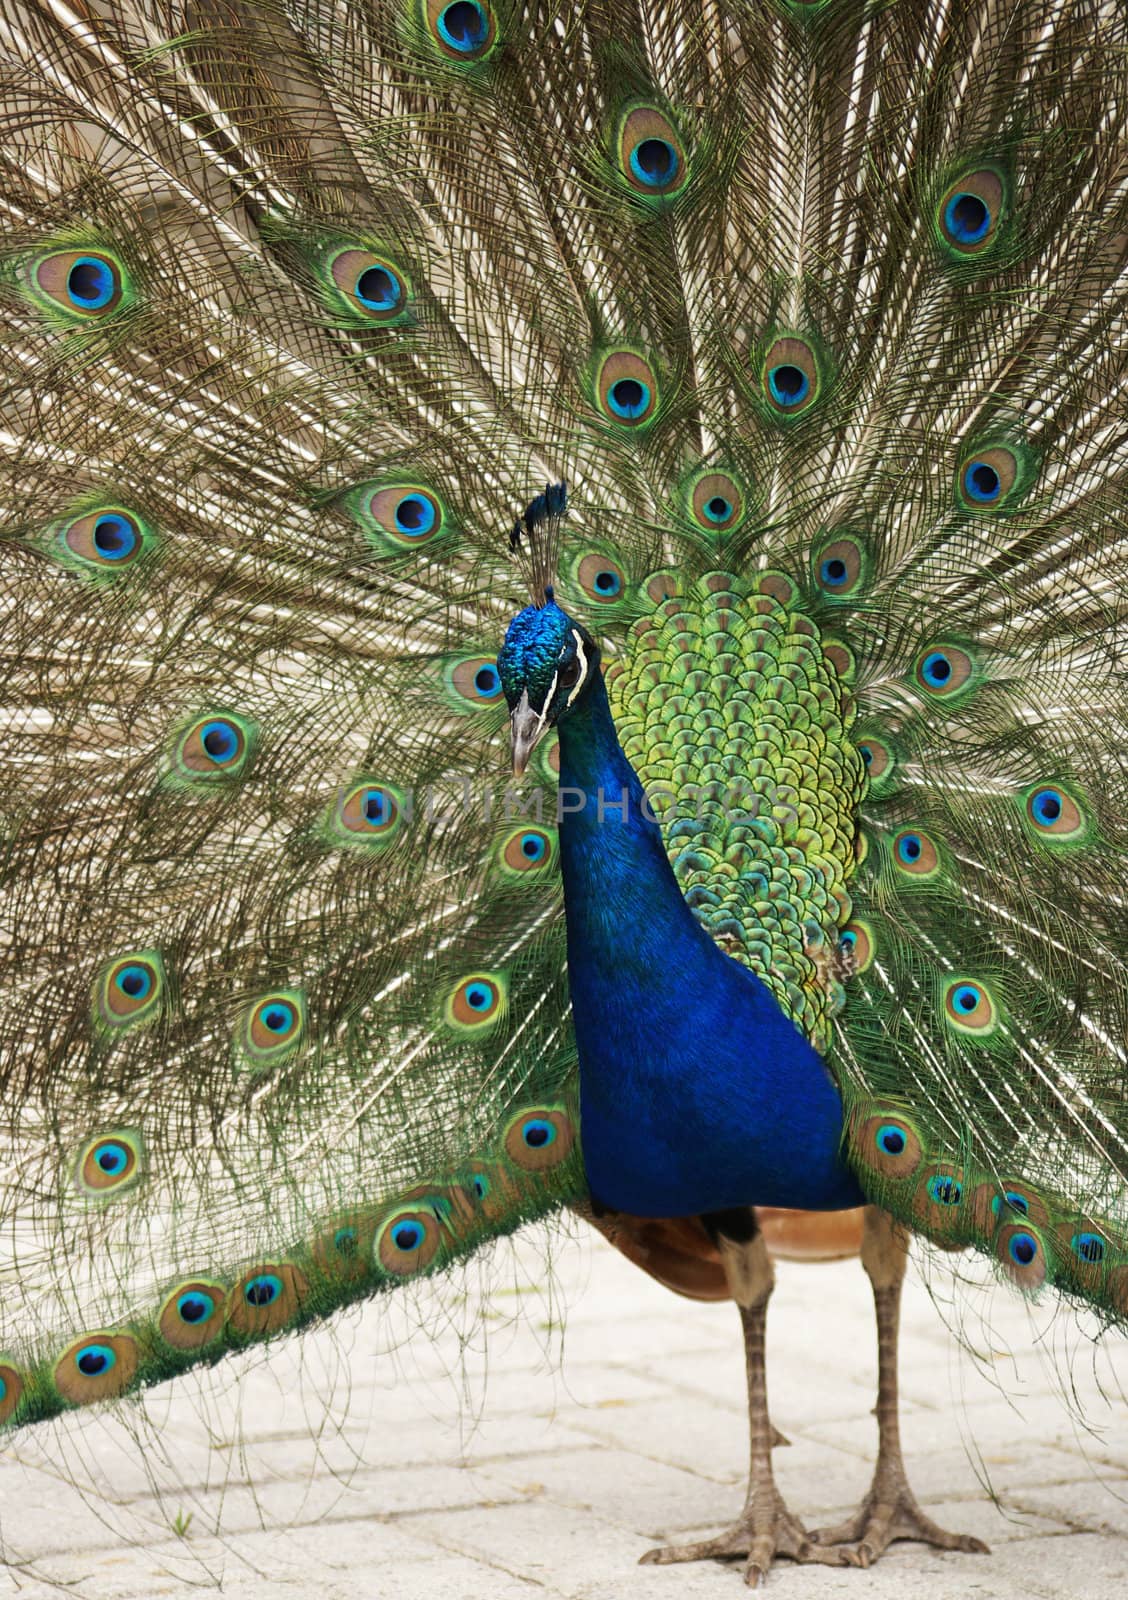 Peacock showing its wonderful colored feathers.         